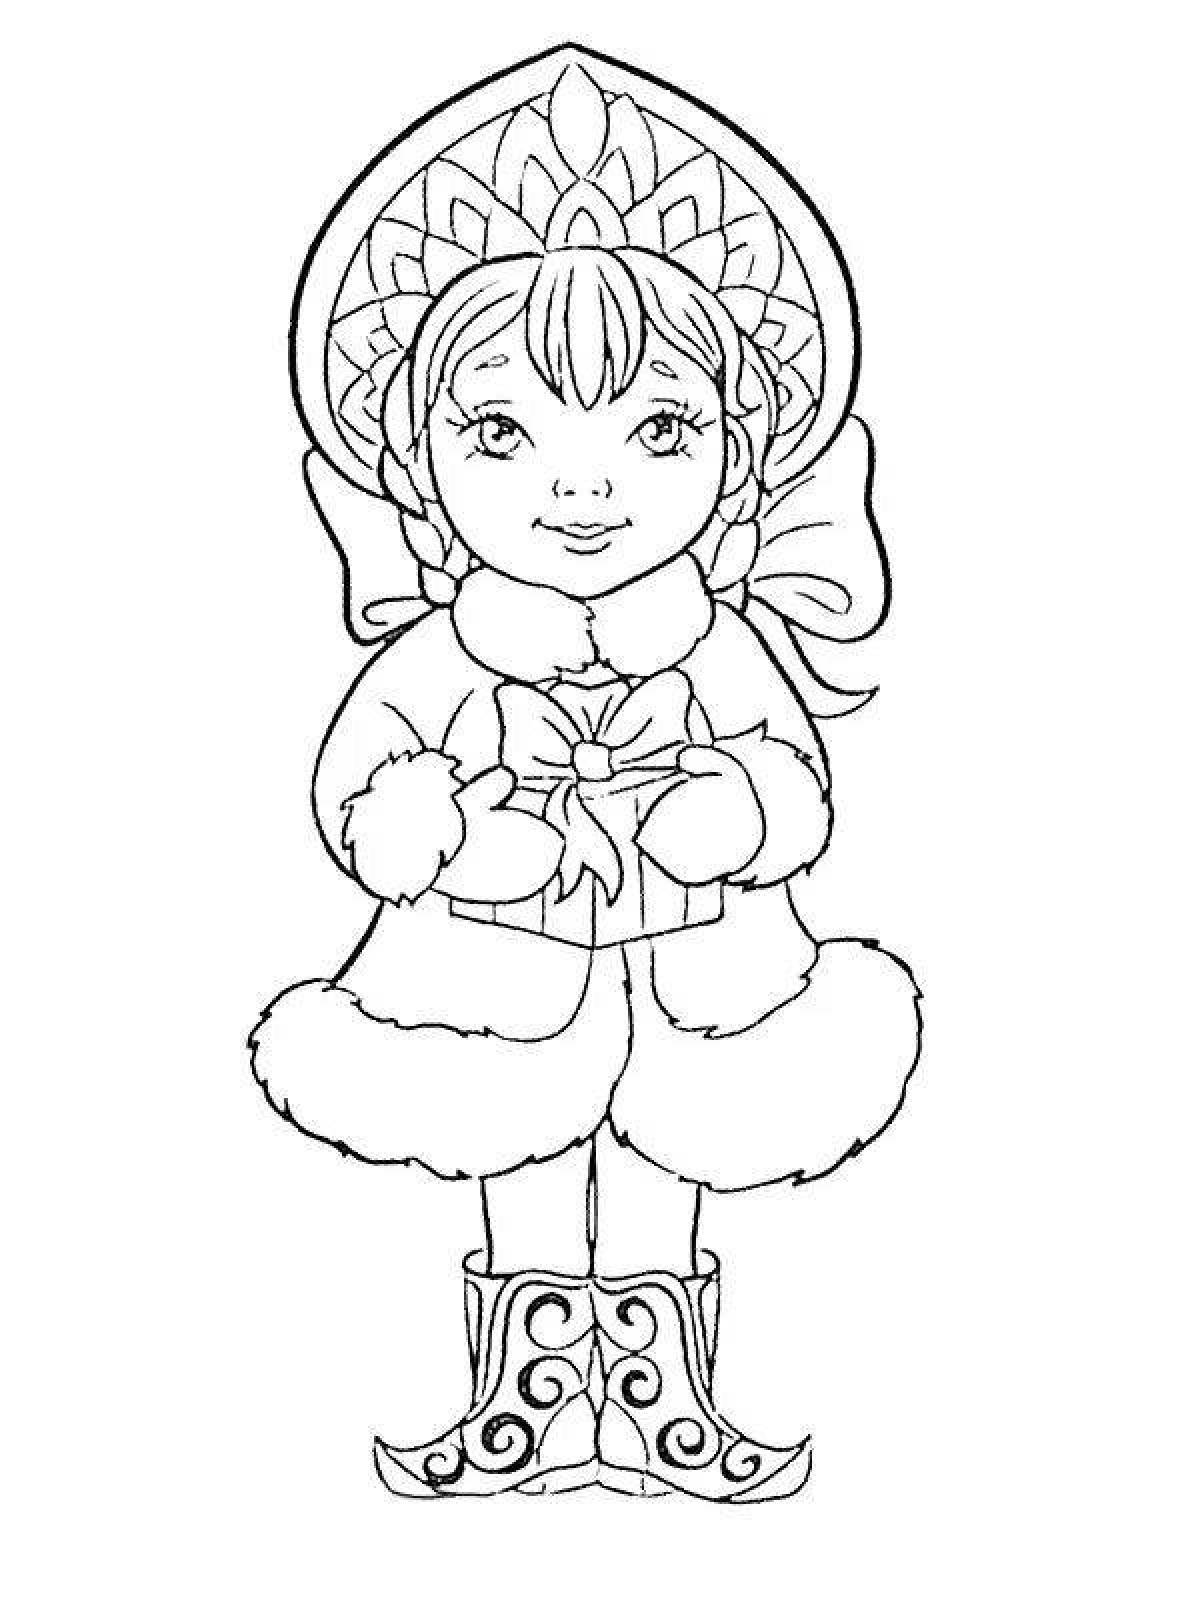 Colorful snow maiden coloring book